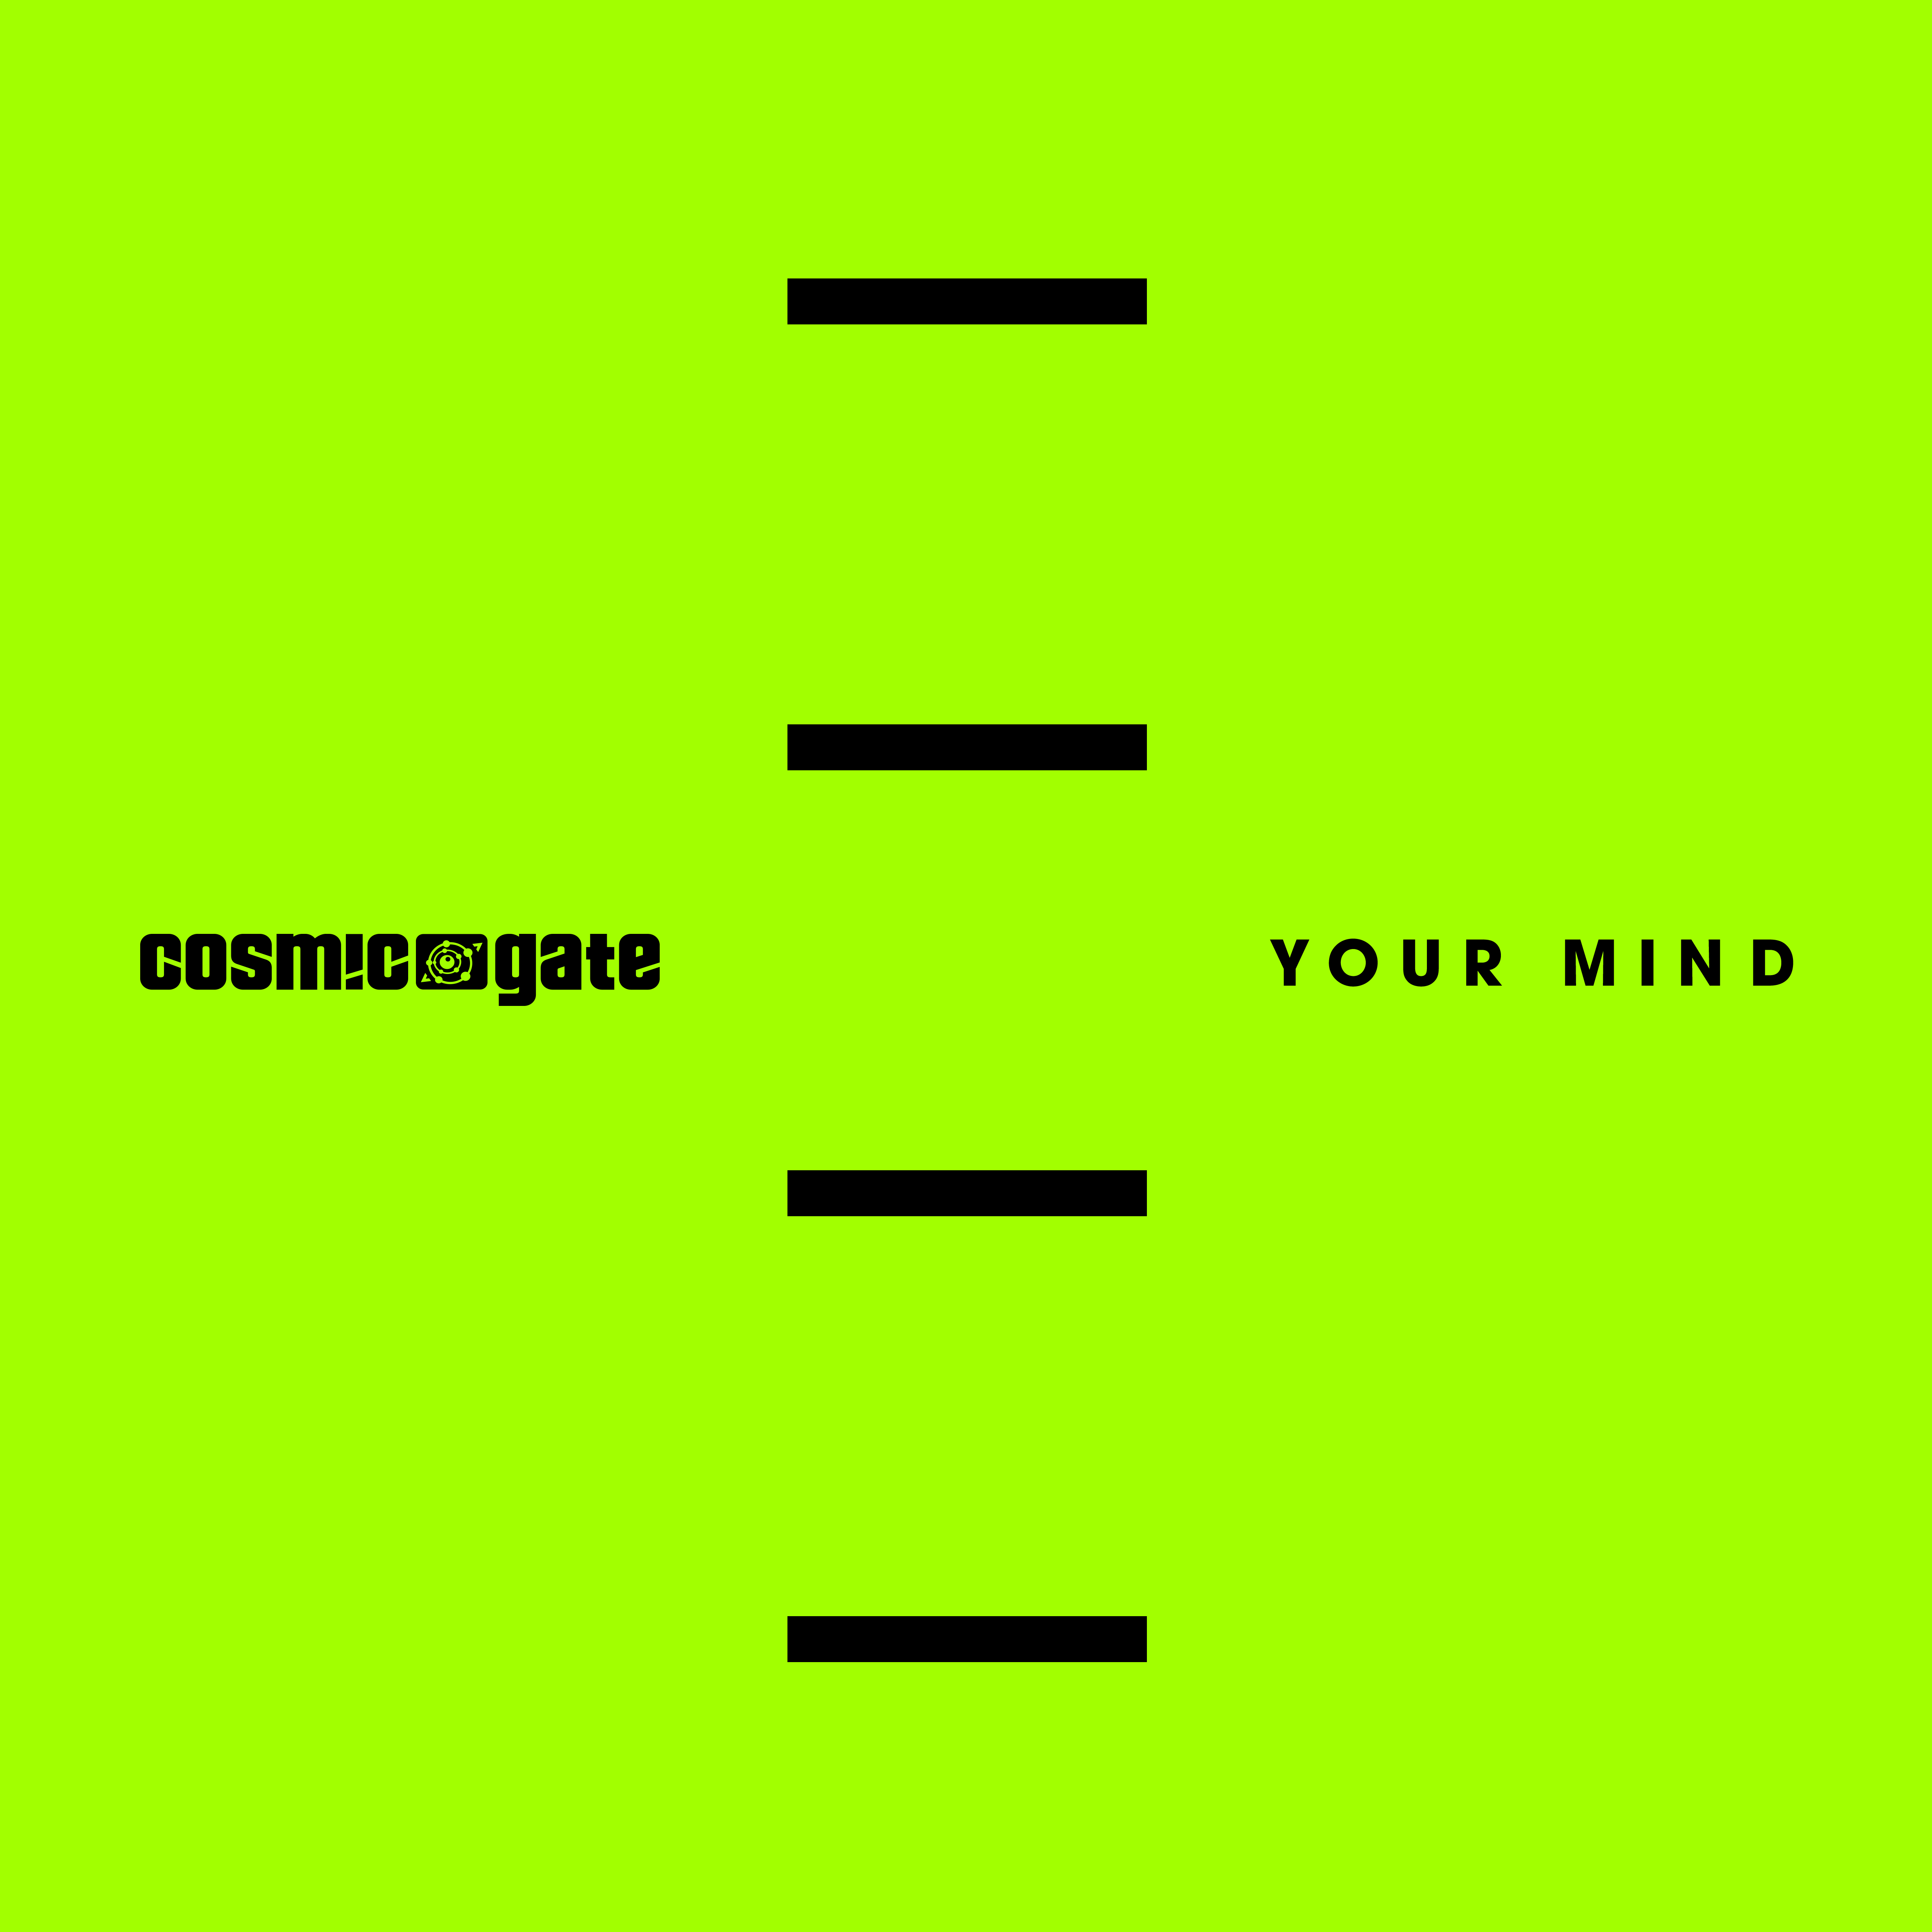 Cosmic Gate - Your Mind